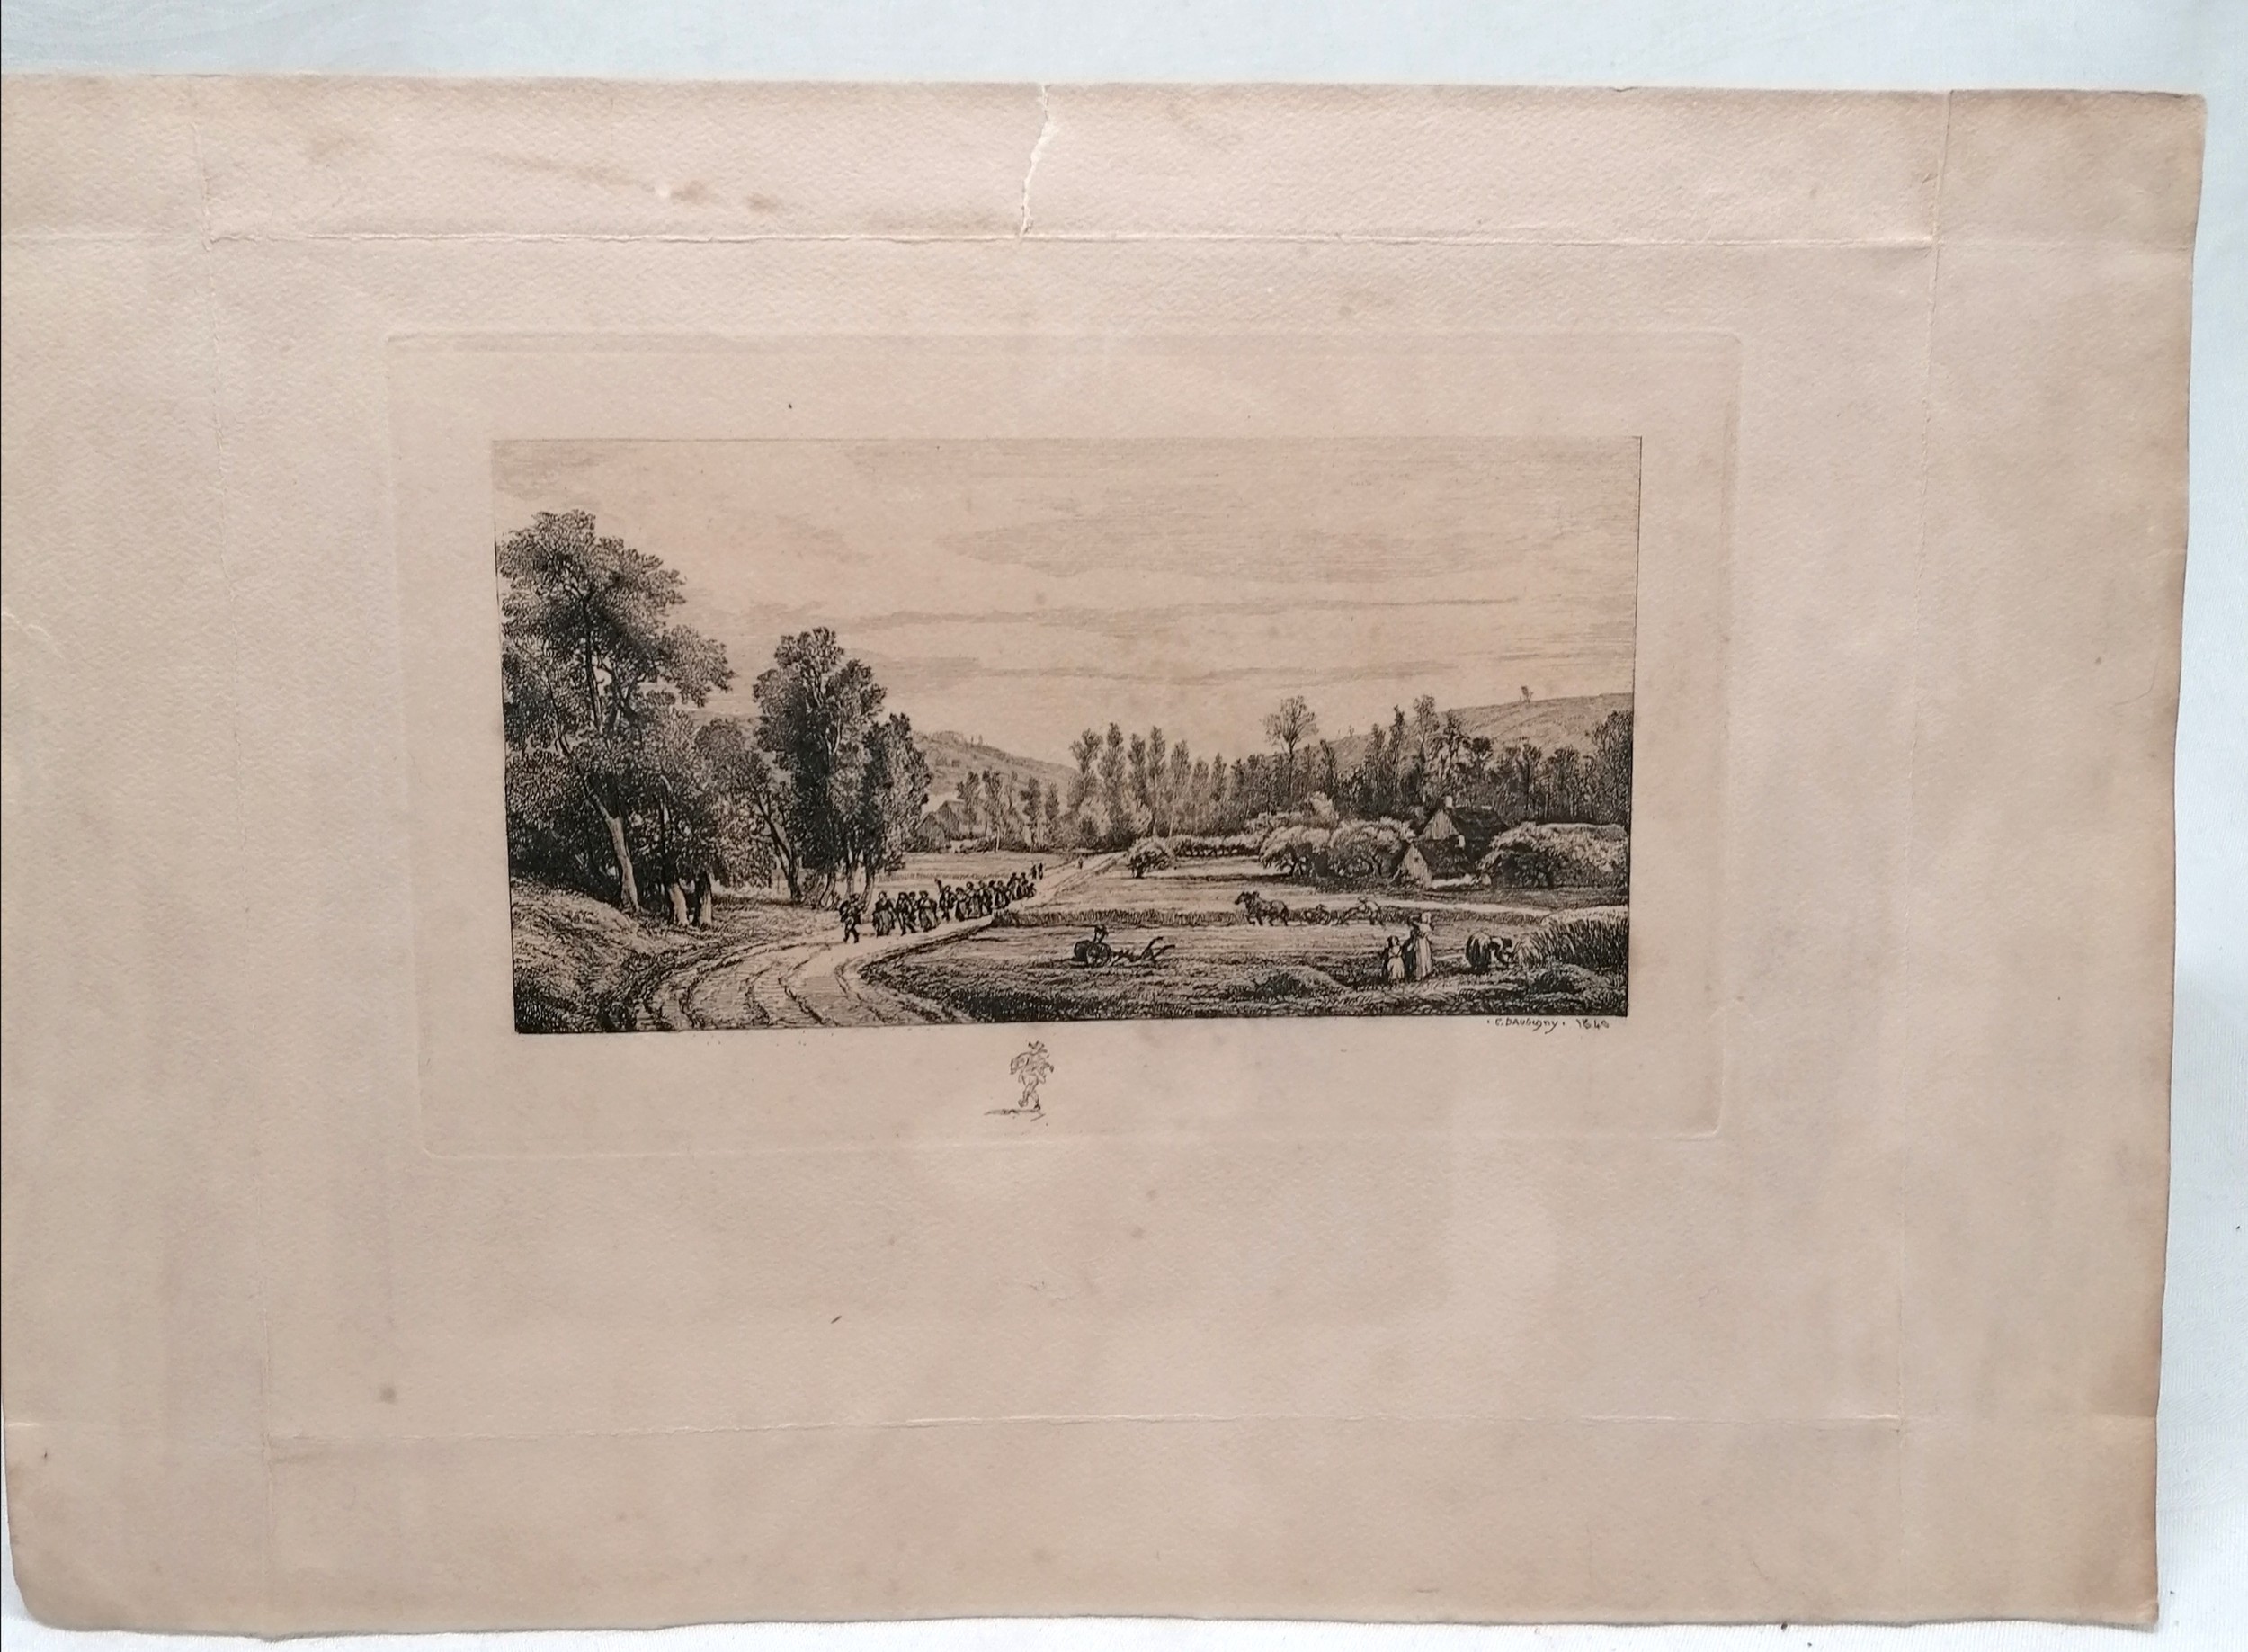 1840 engraving of a pastoral scene by Charles-François Daubigny (1817-78) - 28cm x 39cm and has